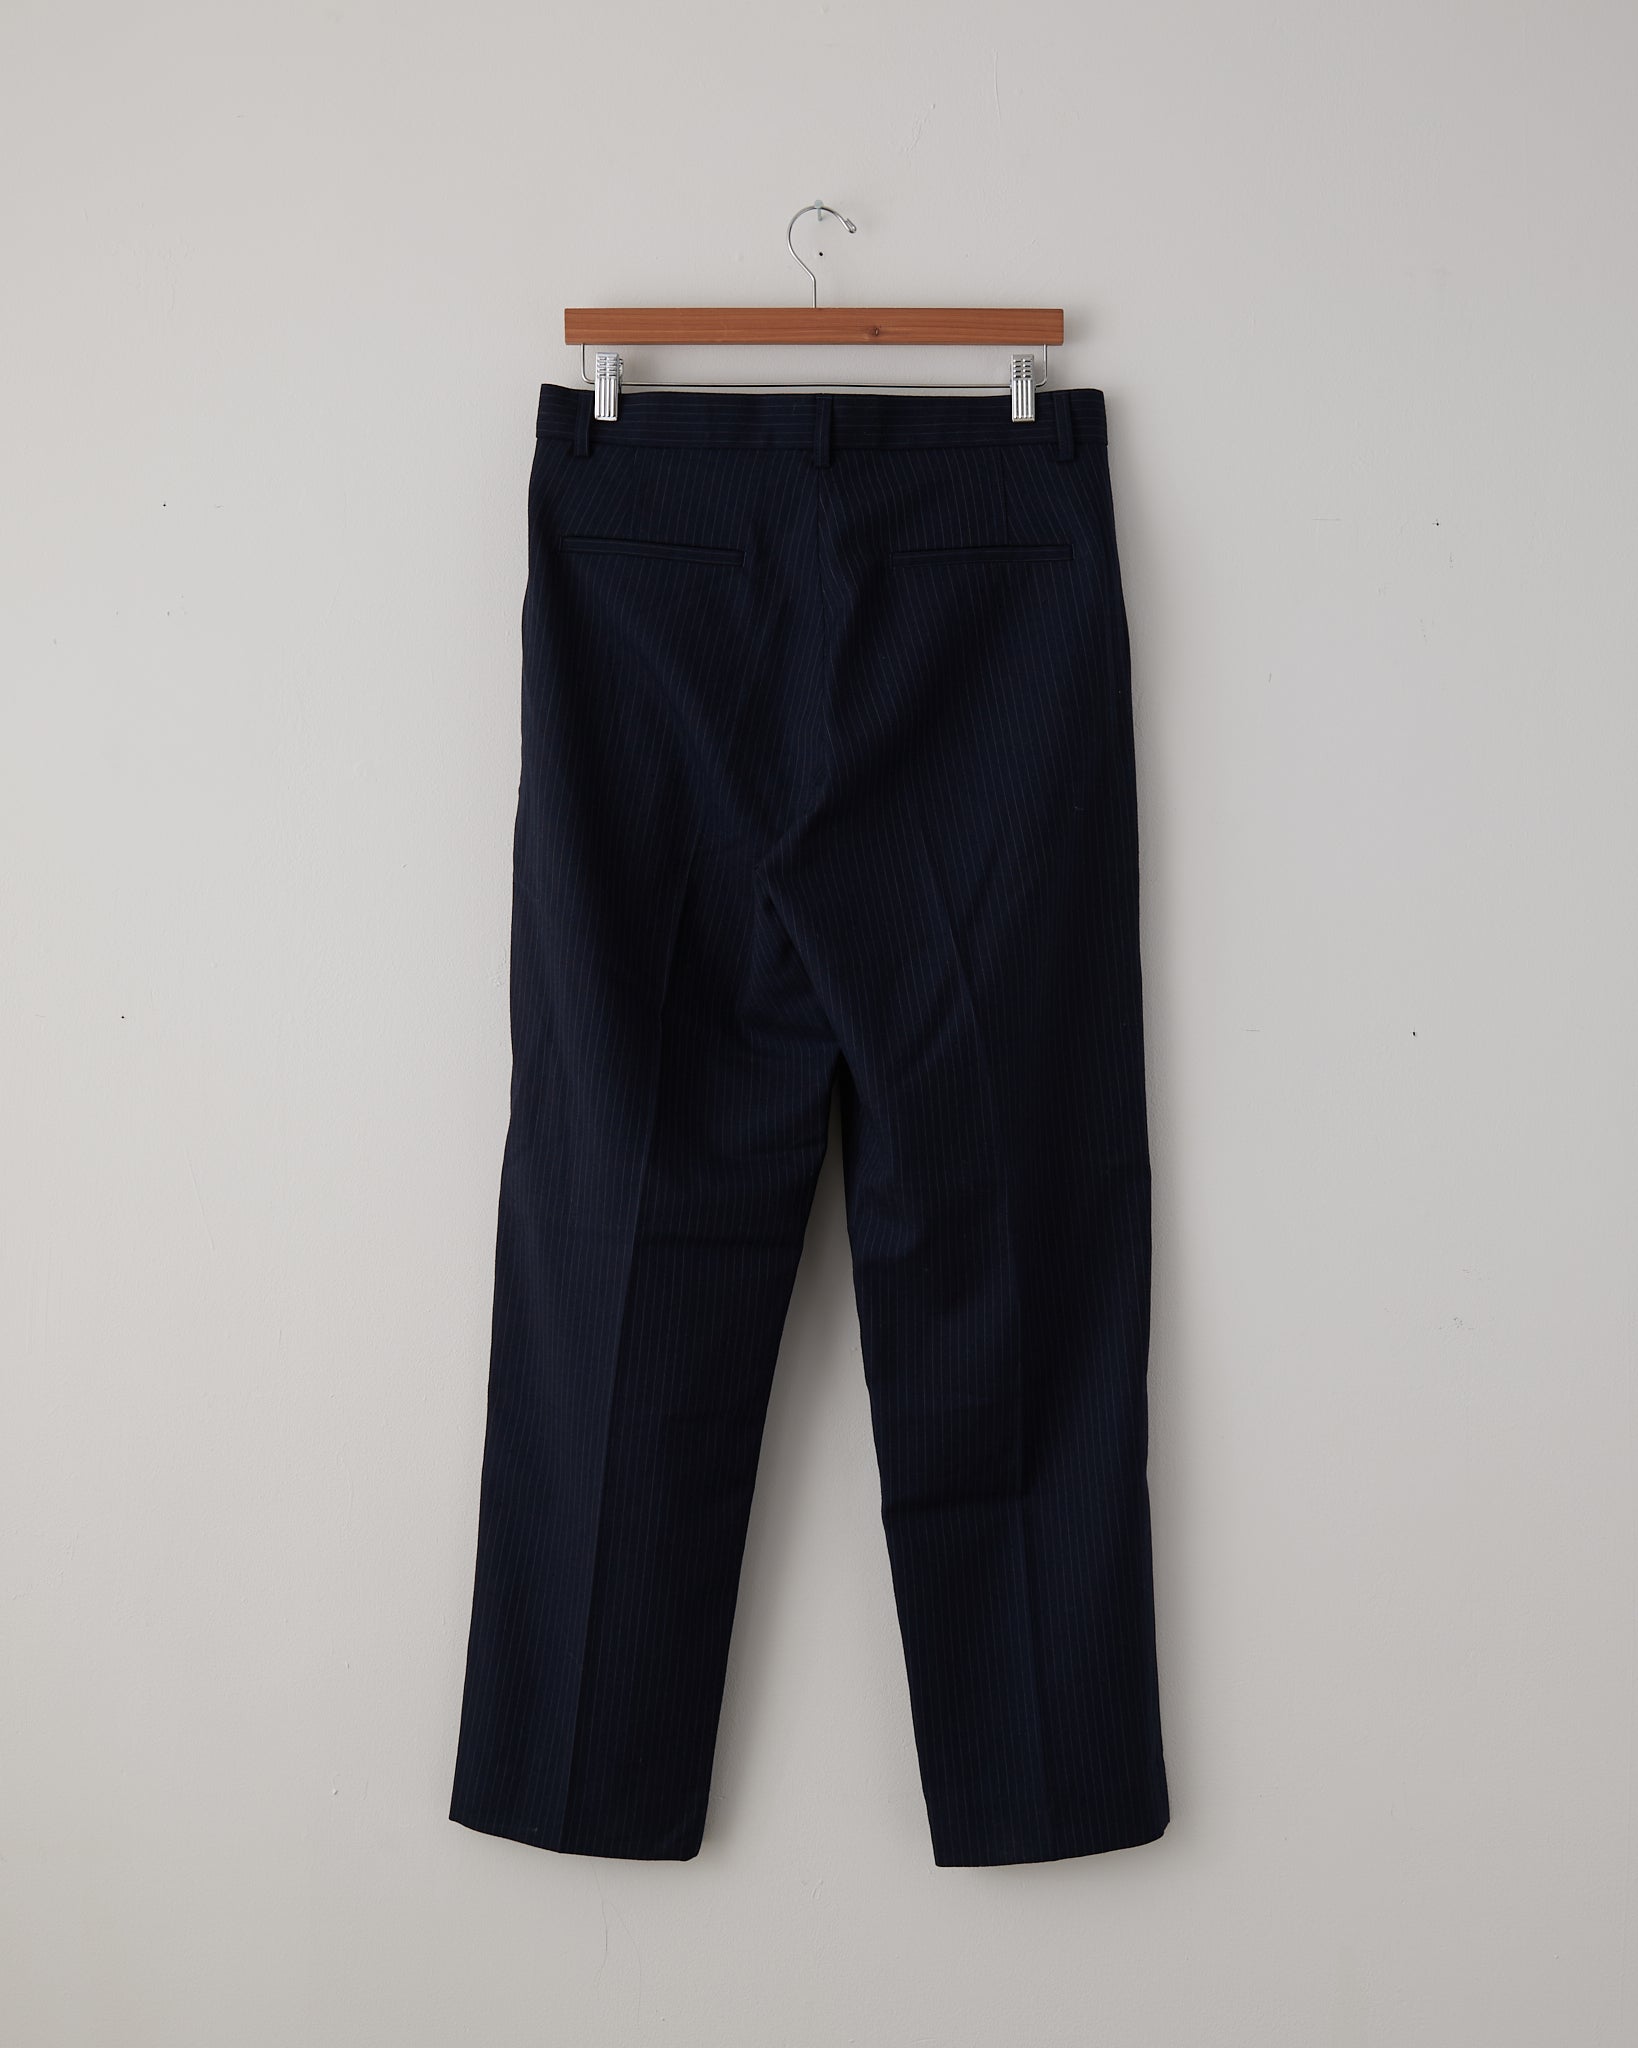 ANOTHER Pants 1.0